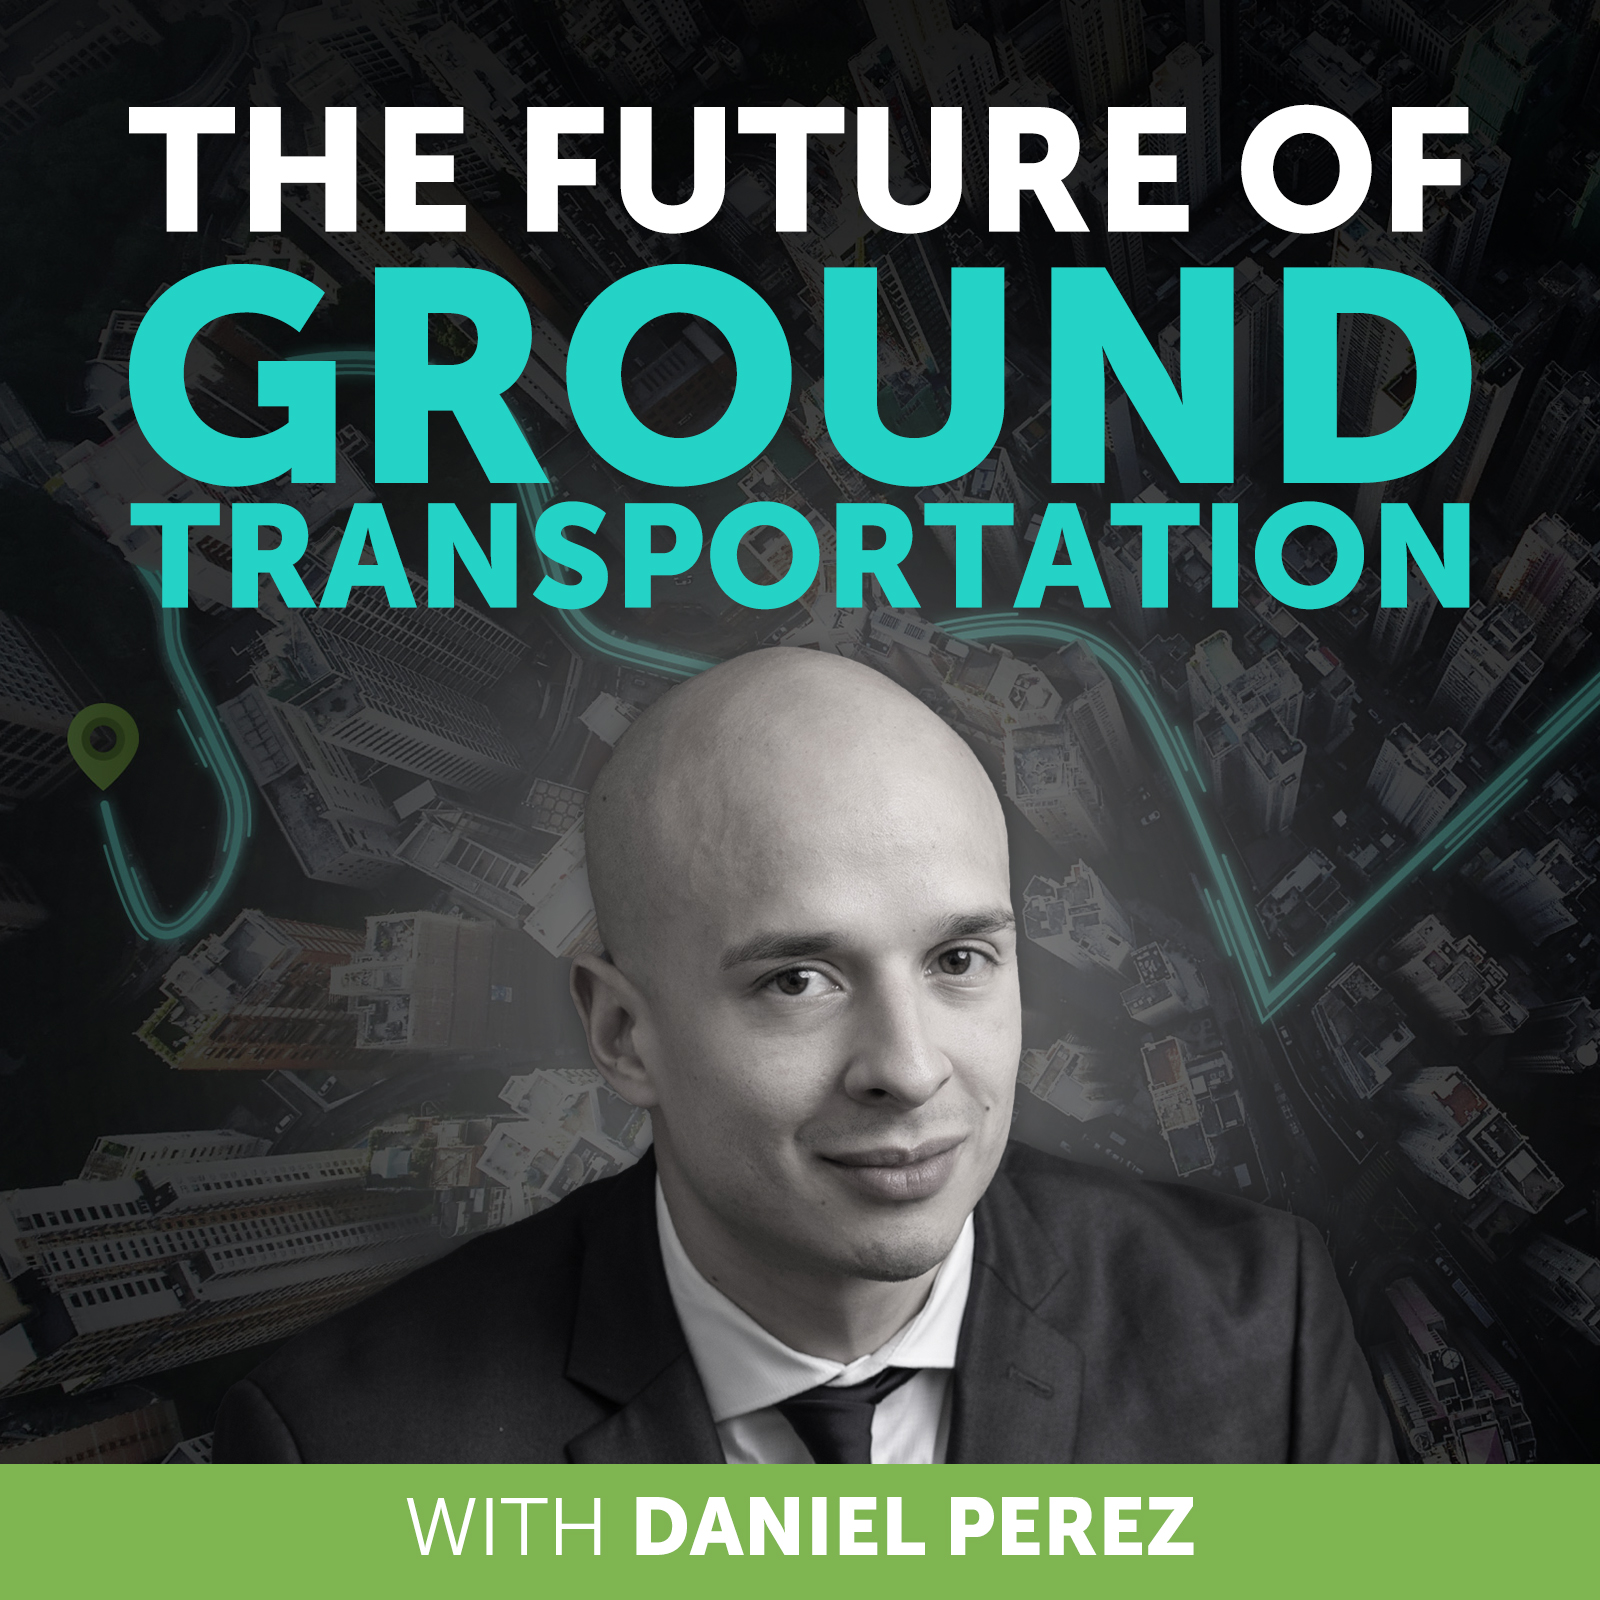 The Future of ground transportation podcast with Daniel Perez